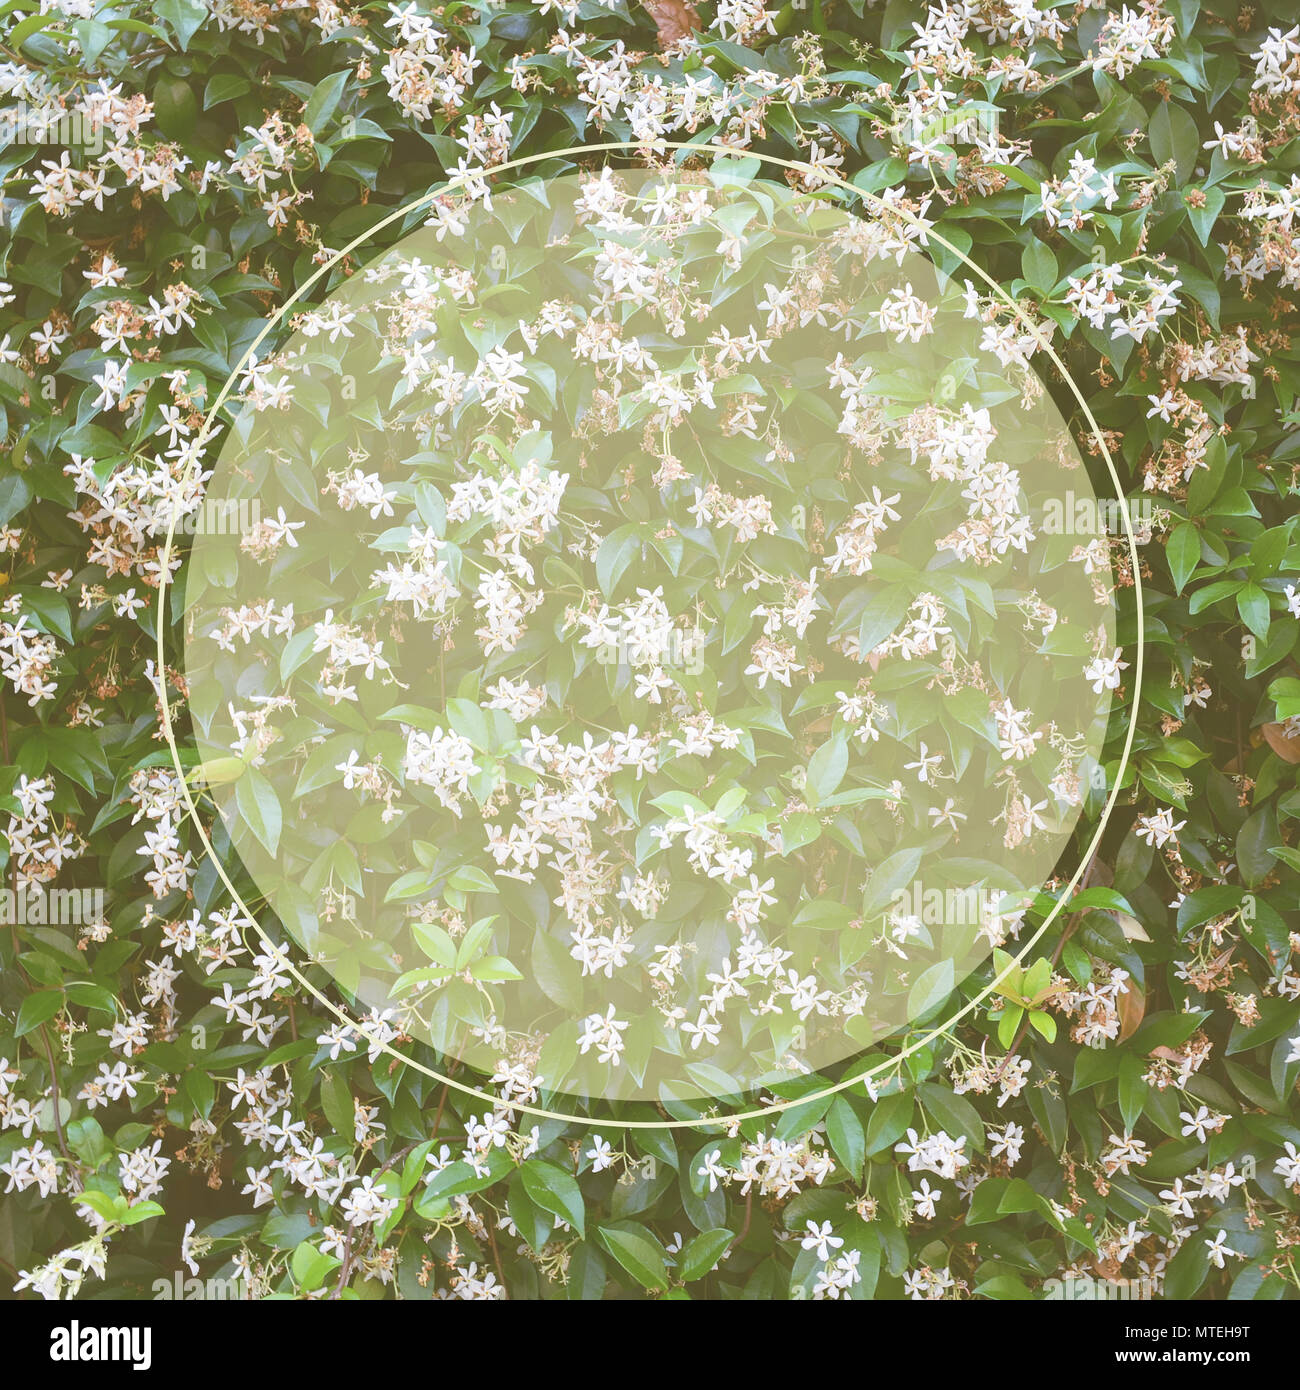 Flowers and leafes of jasmine outdoor with round place for message. Square format. Stock Photo